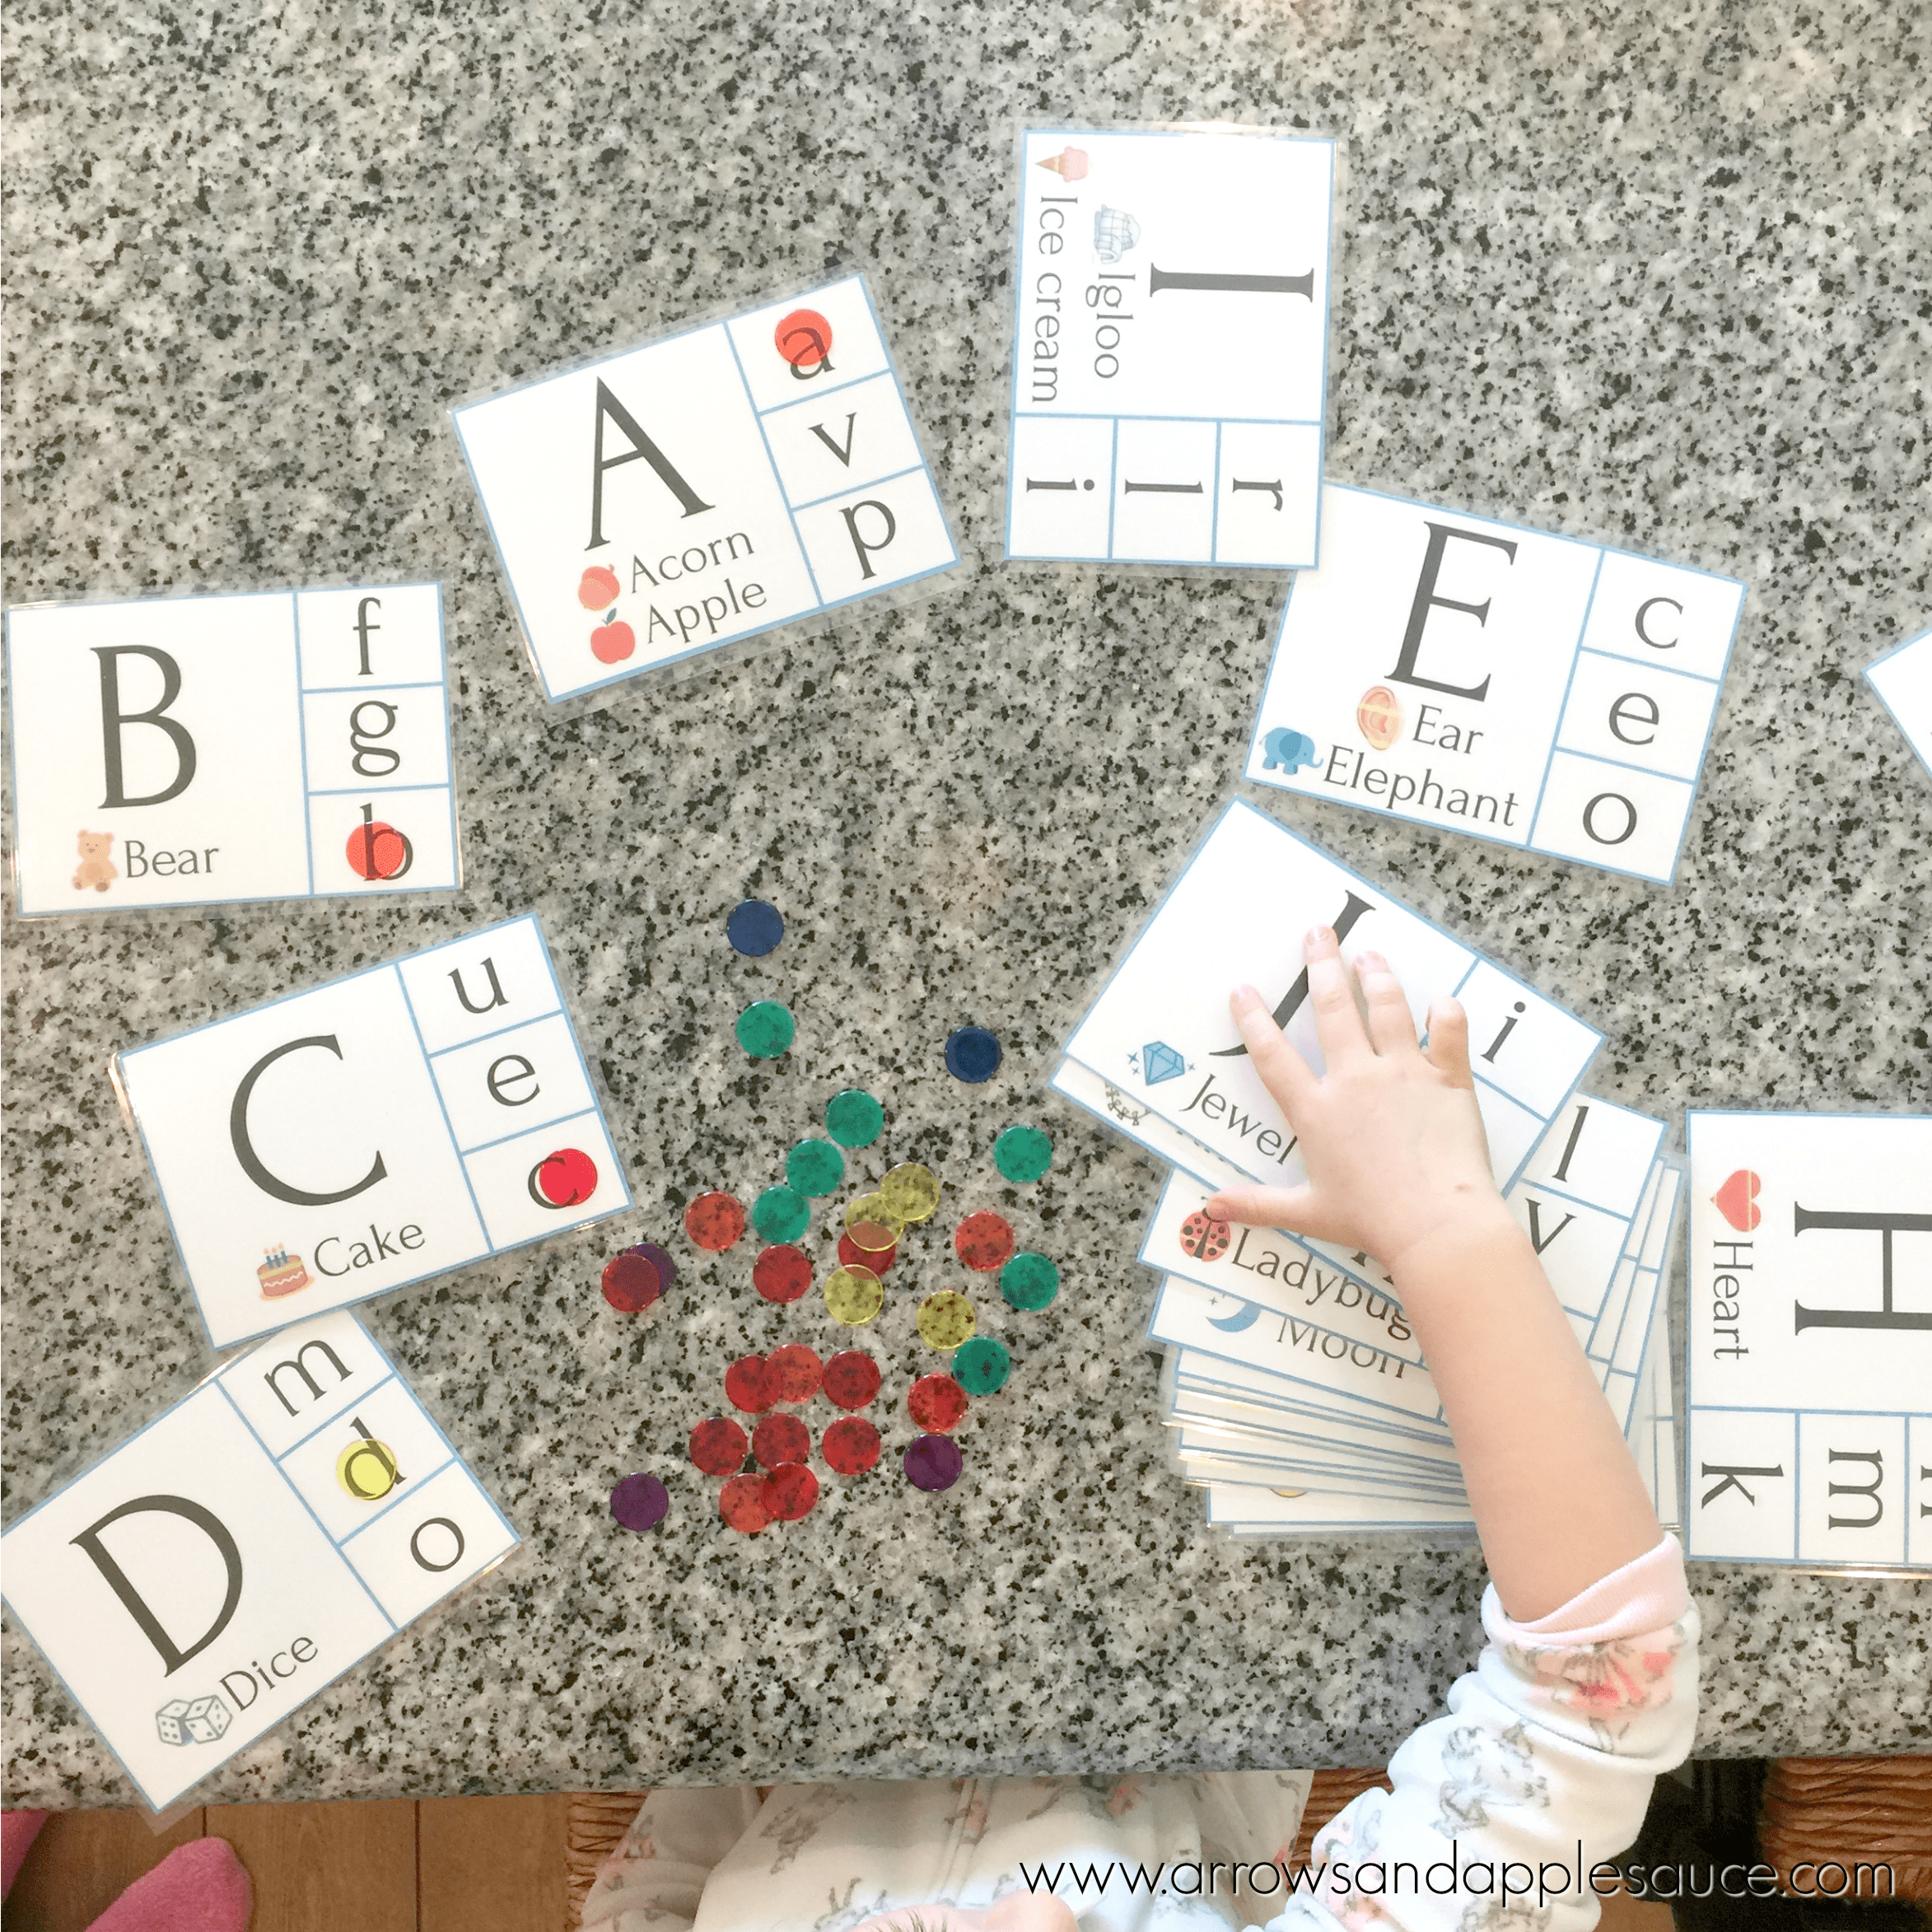 Free alphabet and counting clip card printables. Learning the alphabet and vowel sounds, and counting up to twenty is fun and easy with these cute clip card matching games. #alphabetactivities #preschoolprintables #learningtocount #clipcards #freeprintables #preschoolathome #preschoolmath #vowelsounds